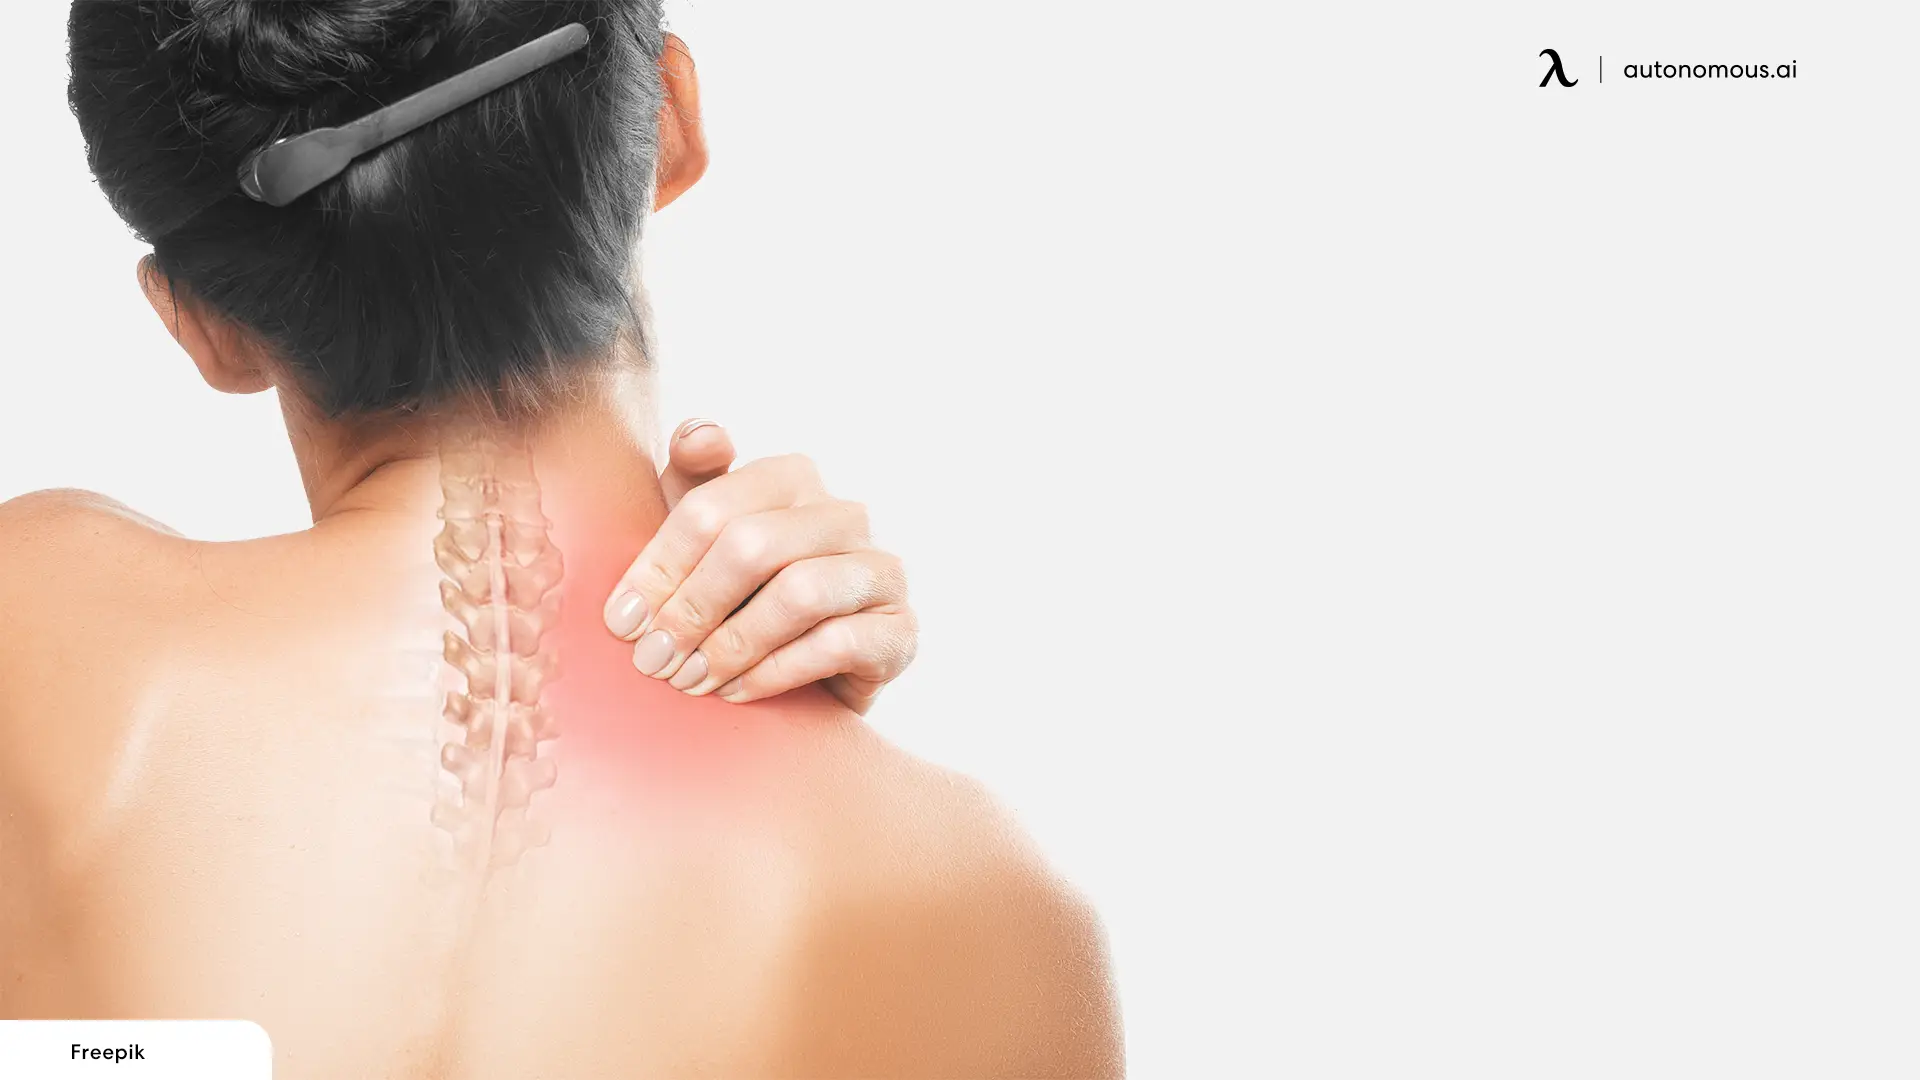 What Happens When Your Neck Hurts?